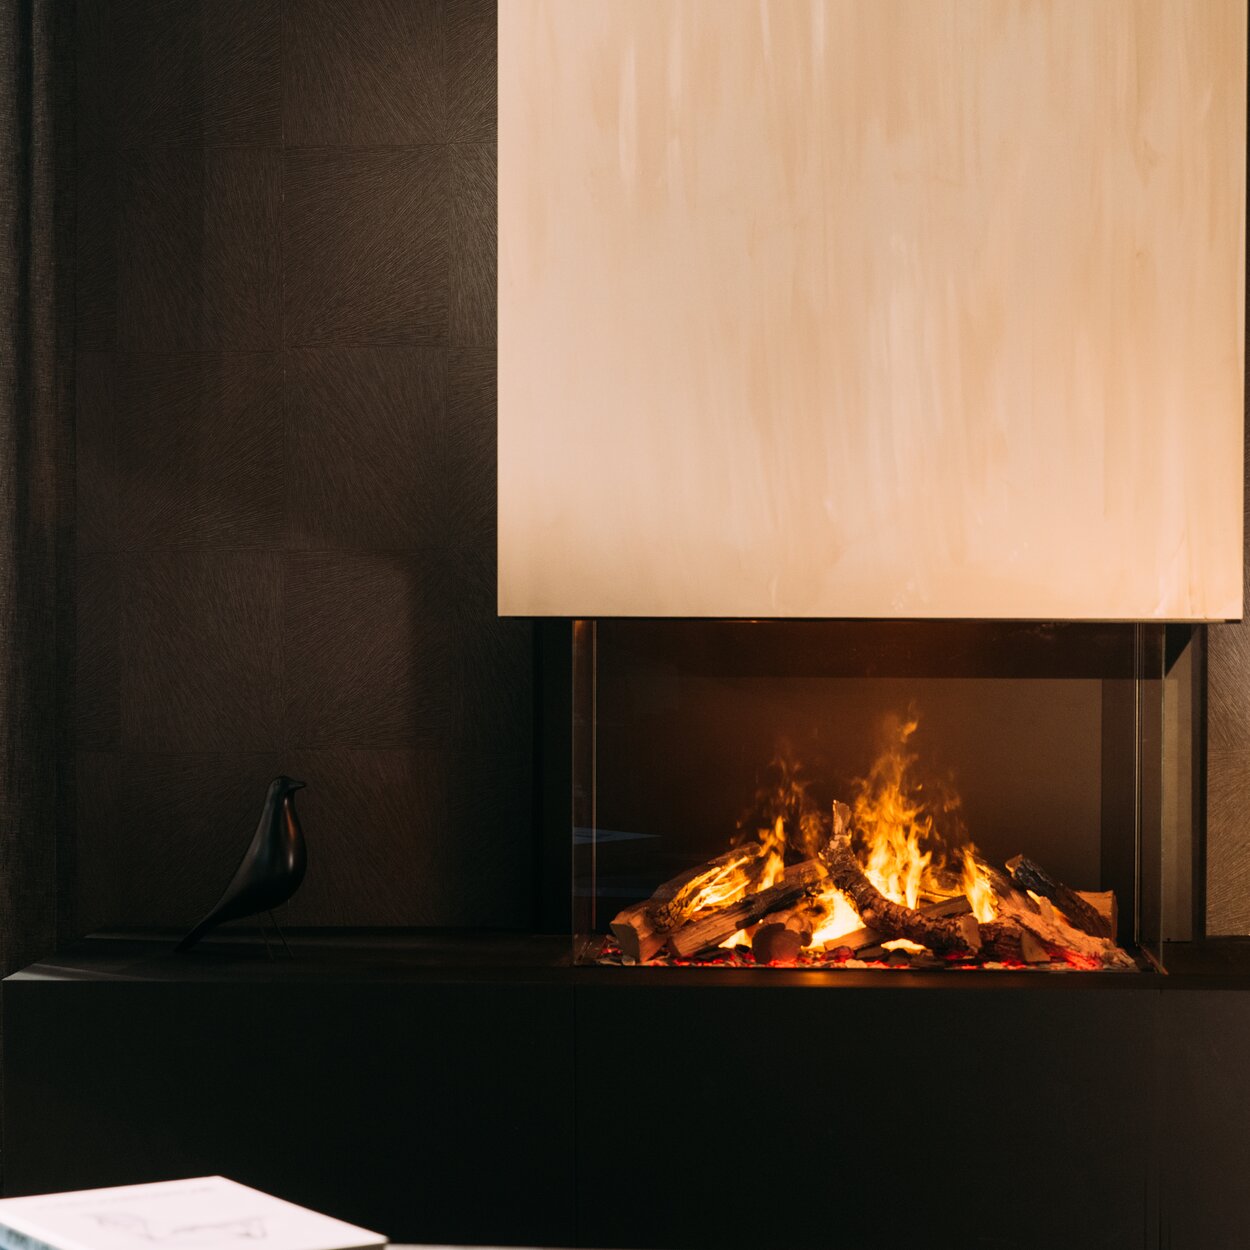 Electric fireplaces e-Matrix Mood 800/500 3-sided glazed in an elegant living room built into a dark wall